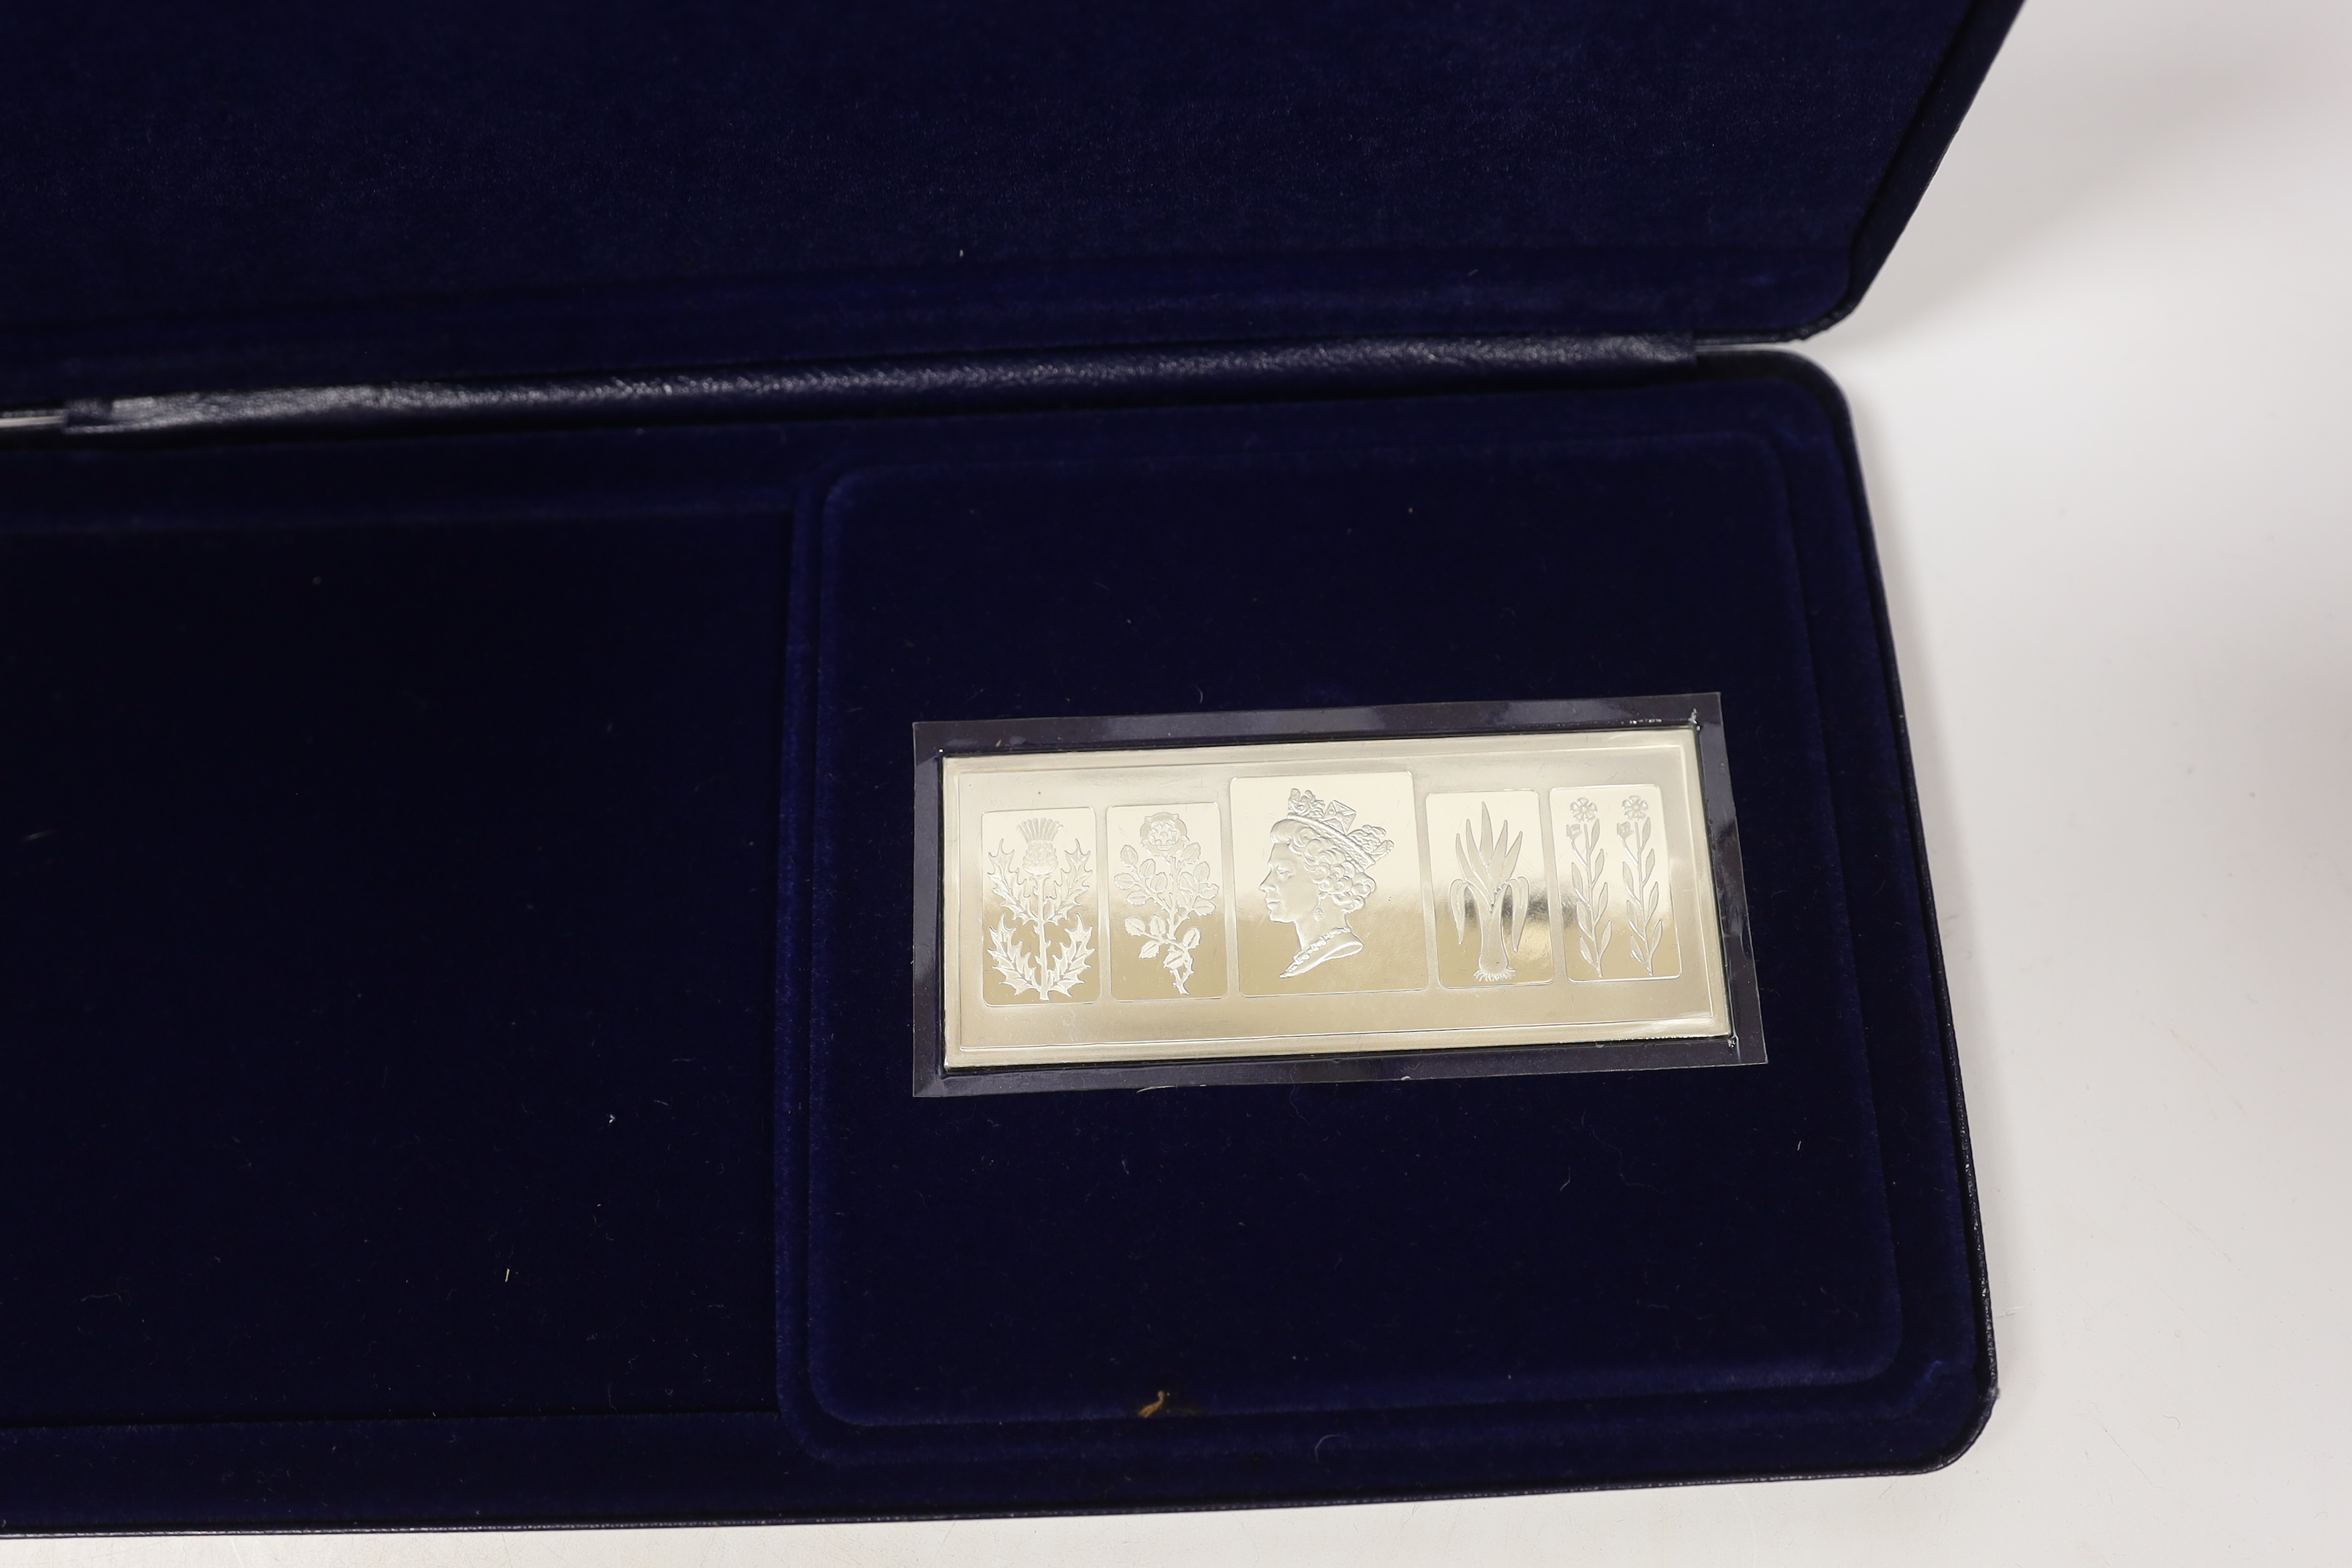 A cased Danbury Mint Queen Elizabeth II Silver Jubilee silver ingot and a Pobjoy Mint 25th anniversary of the Queen's coronation twin silver gilt medallions and First Day covers album